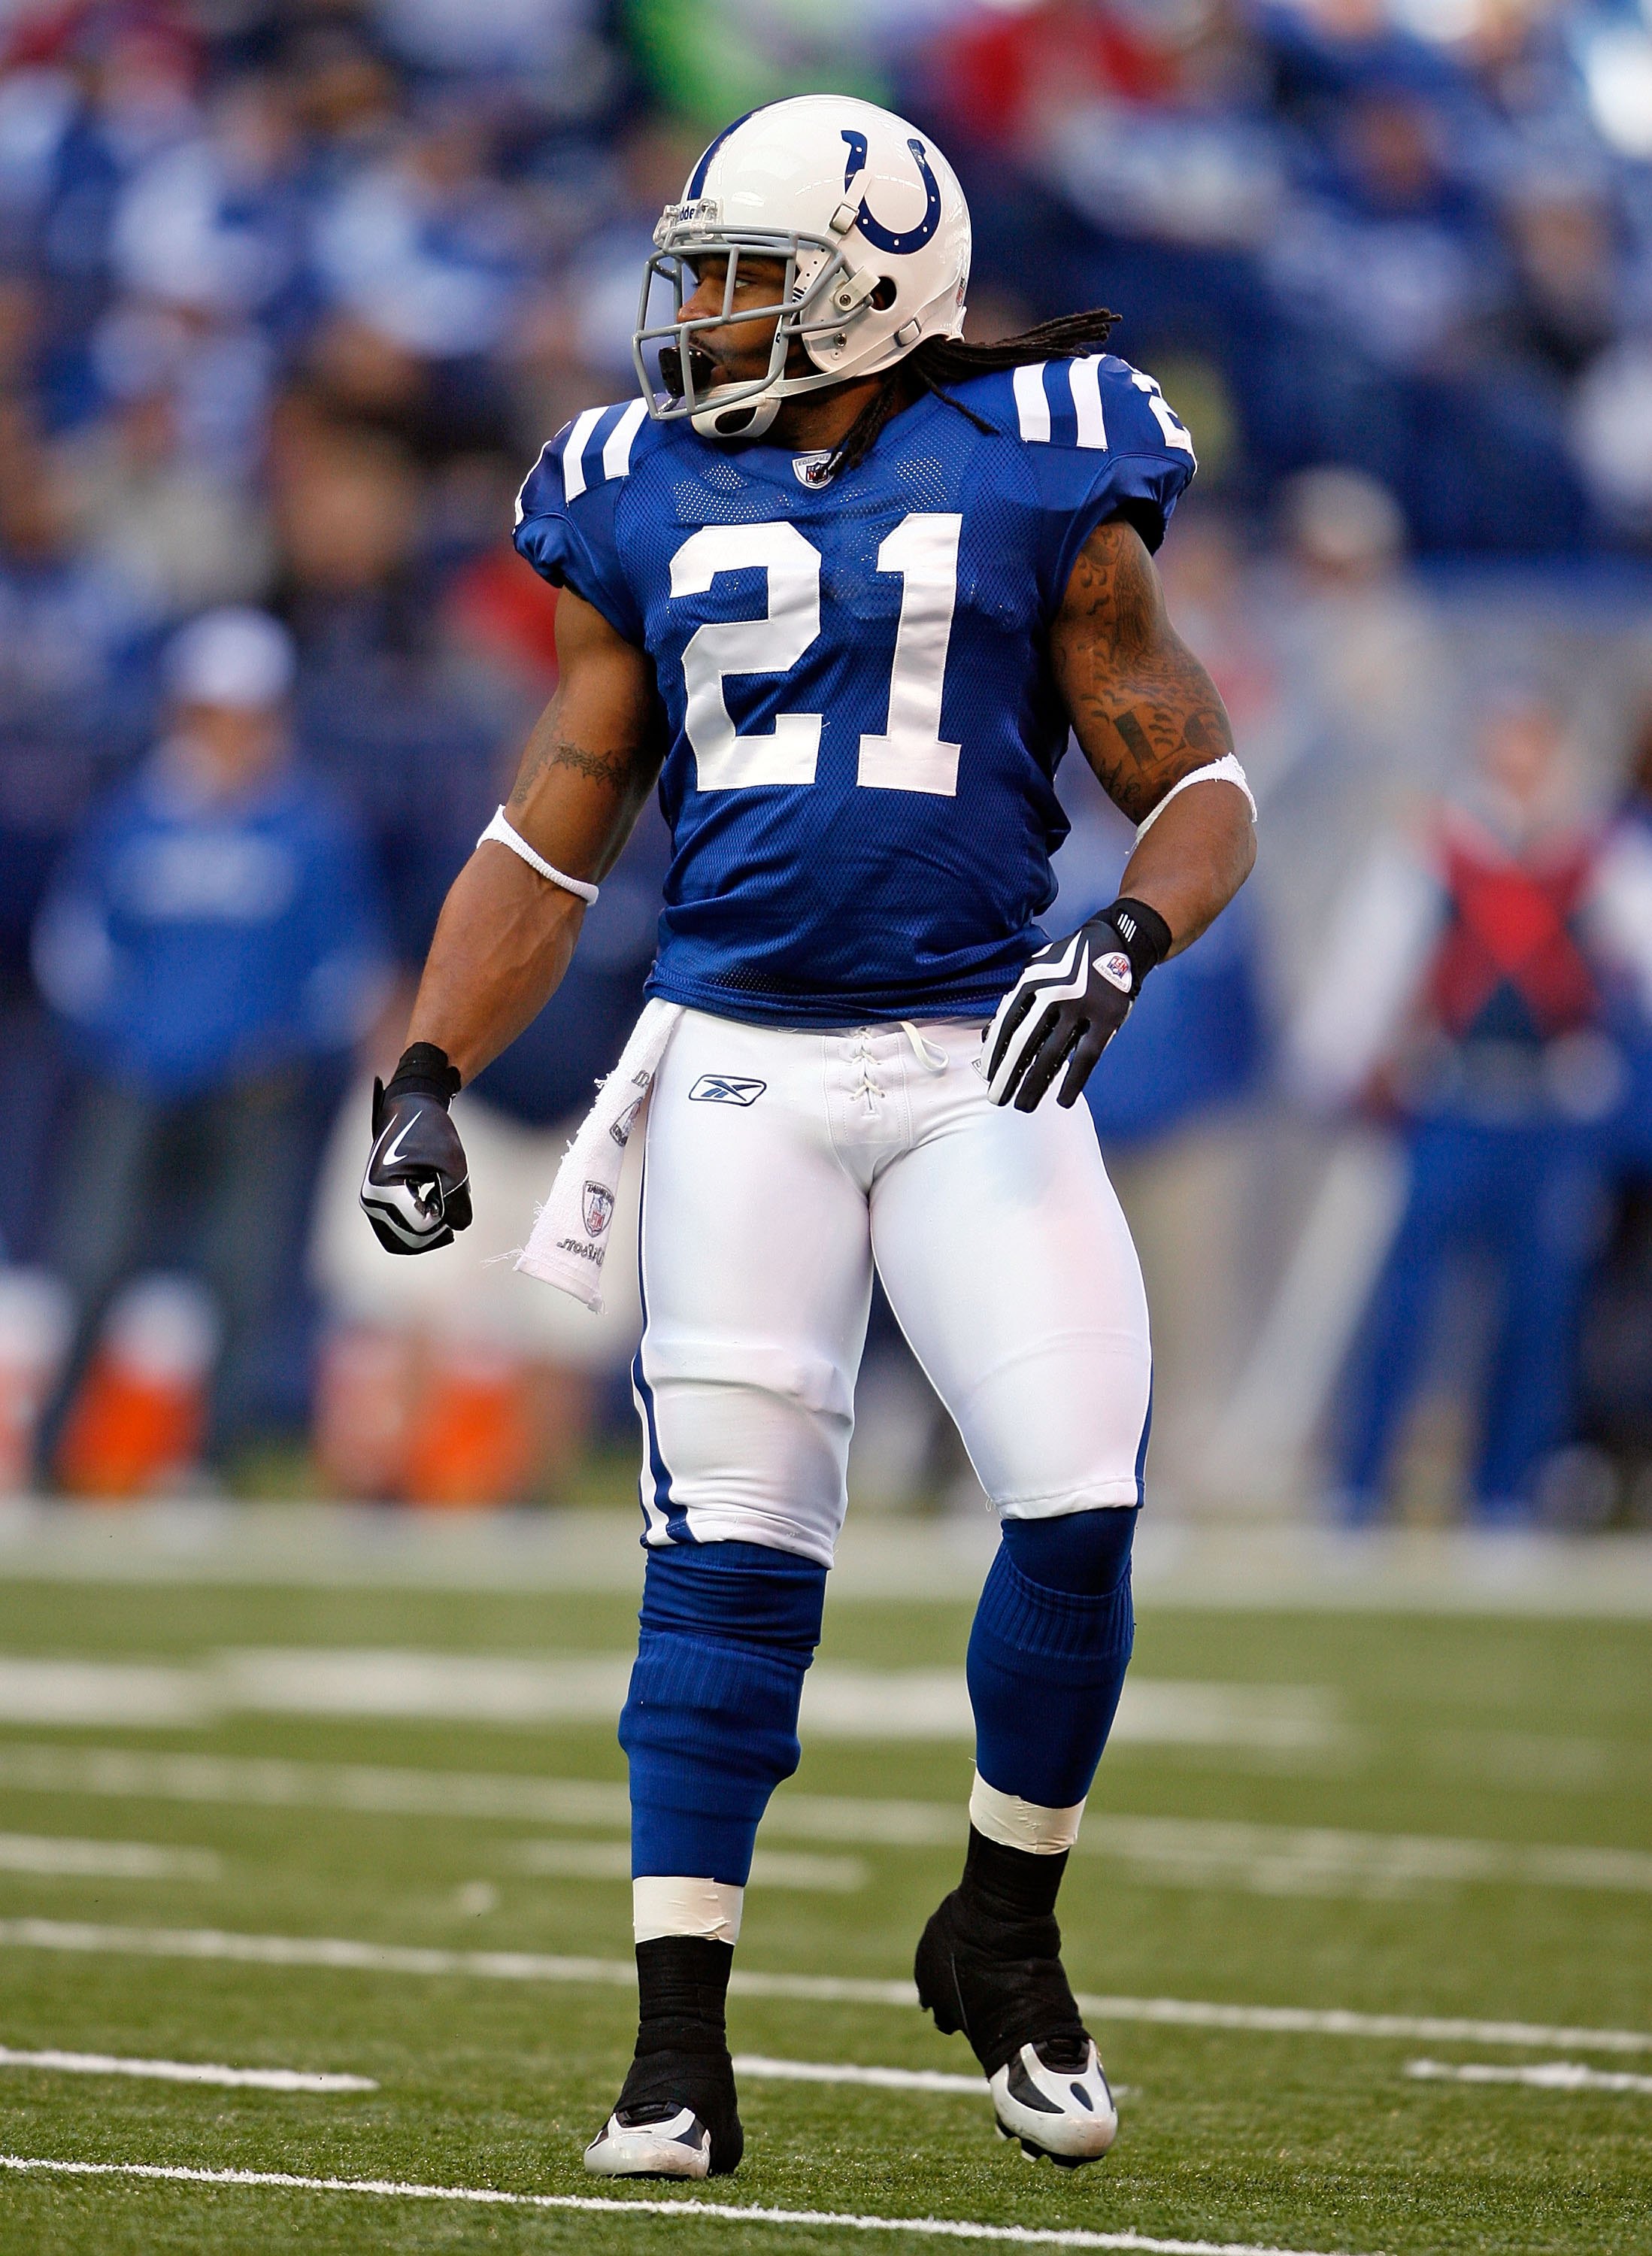 INDIANAPOLIS - NOVEMBER 01:  Bob Sanders #21 of the Indianapolis Colts moves on the field during the NFL game against the San Francisco 49ers at Lucas Oil Stadium on November 1, 2009 in Indianapolis, Indiana.  (Photo by Andy Lyons/Getty Images)